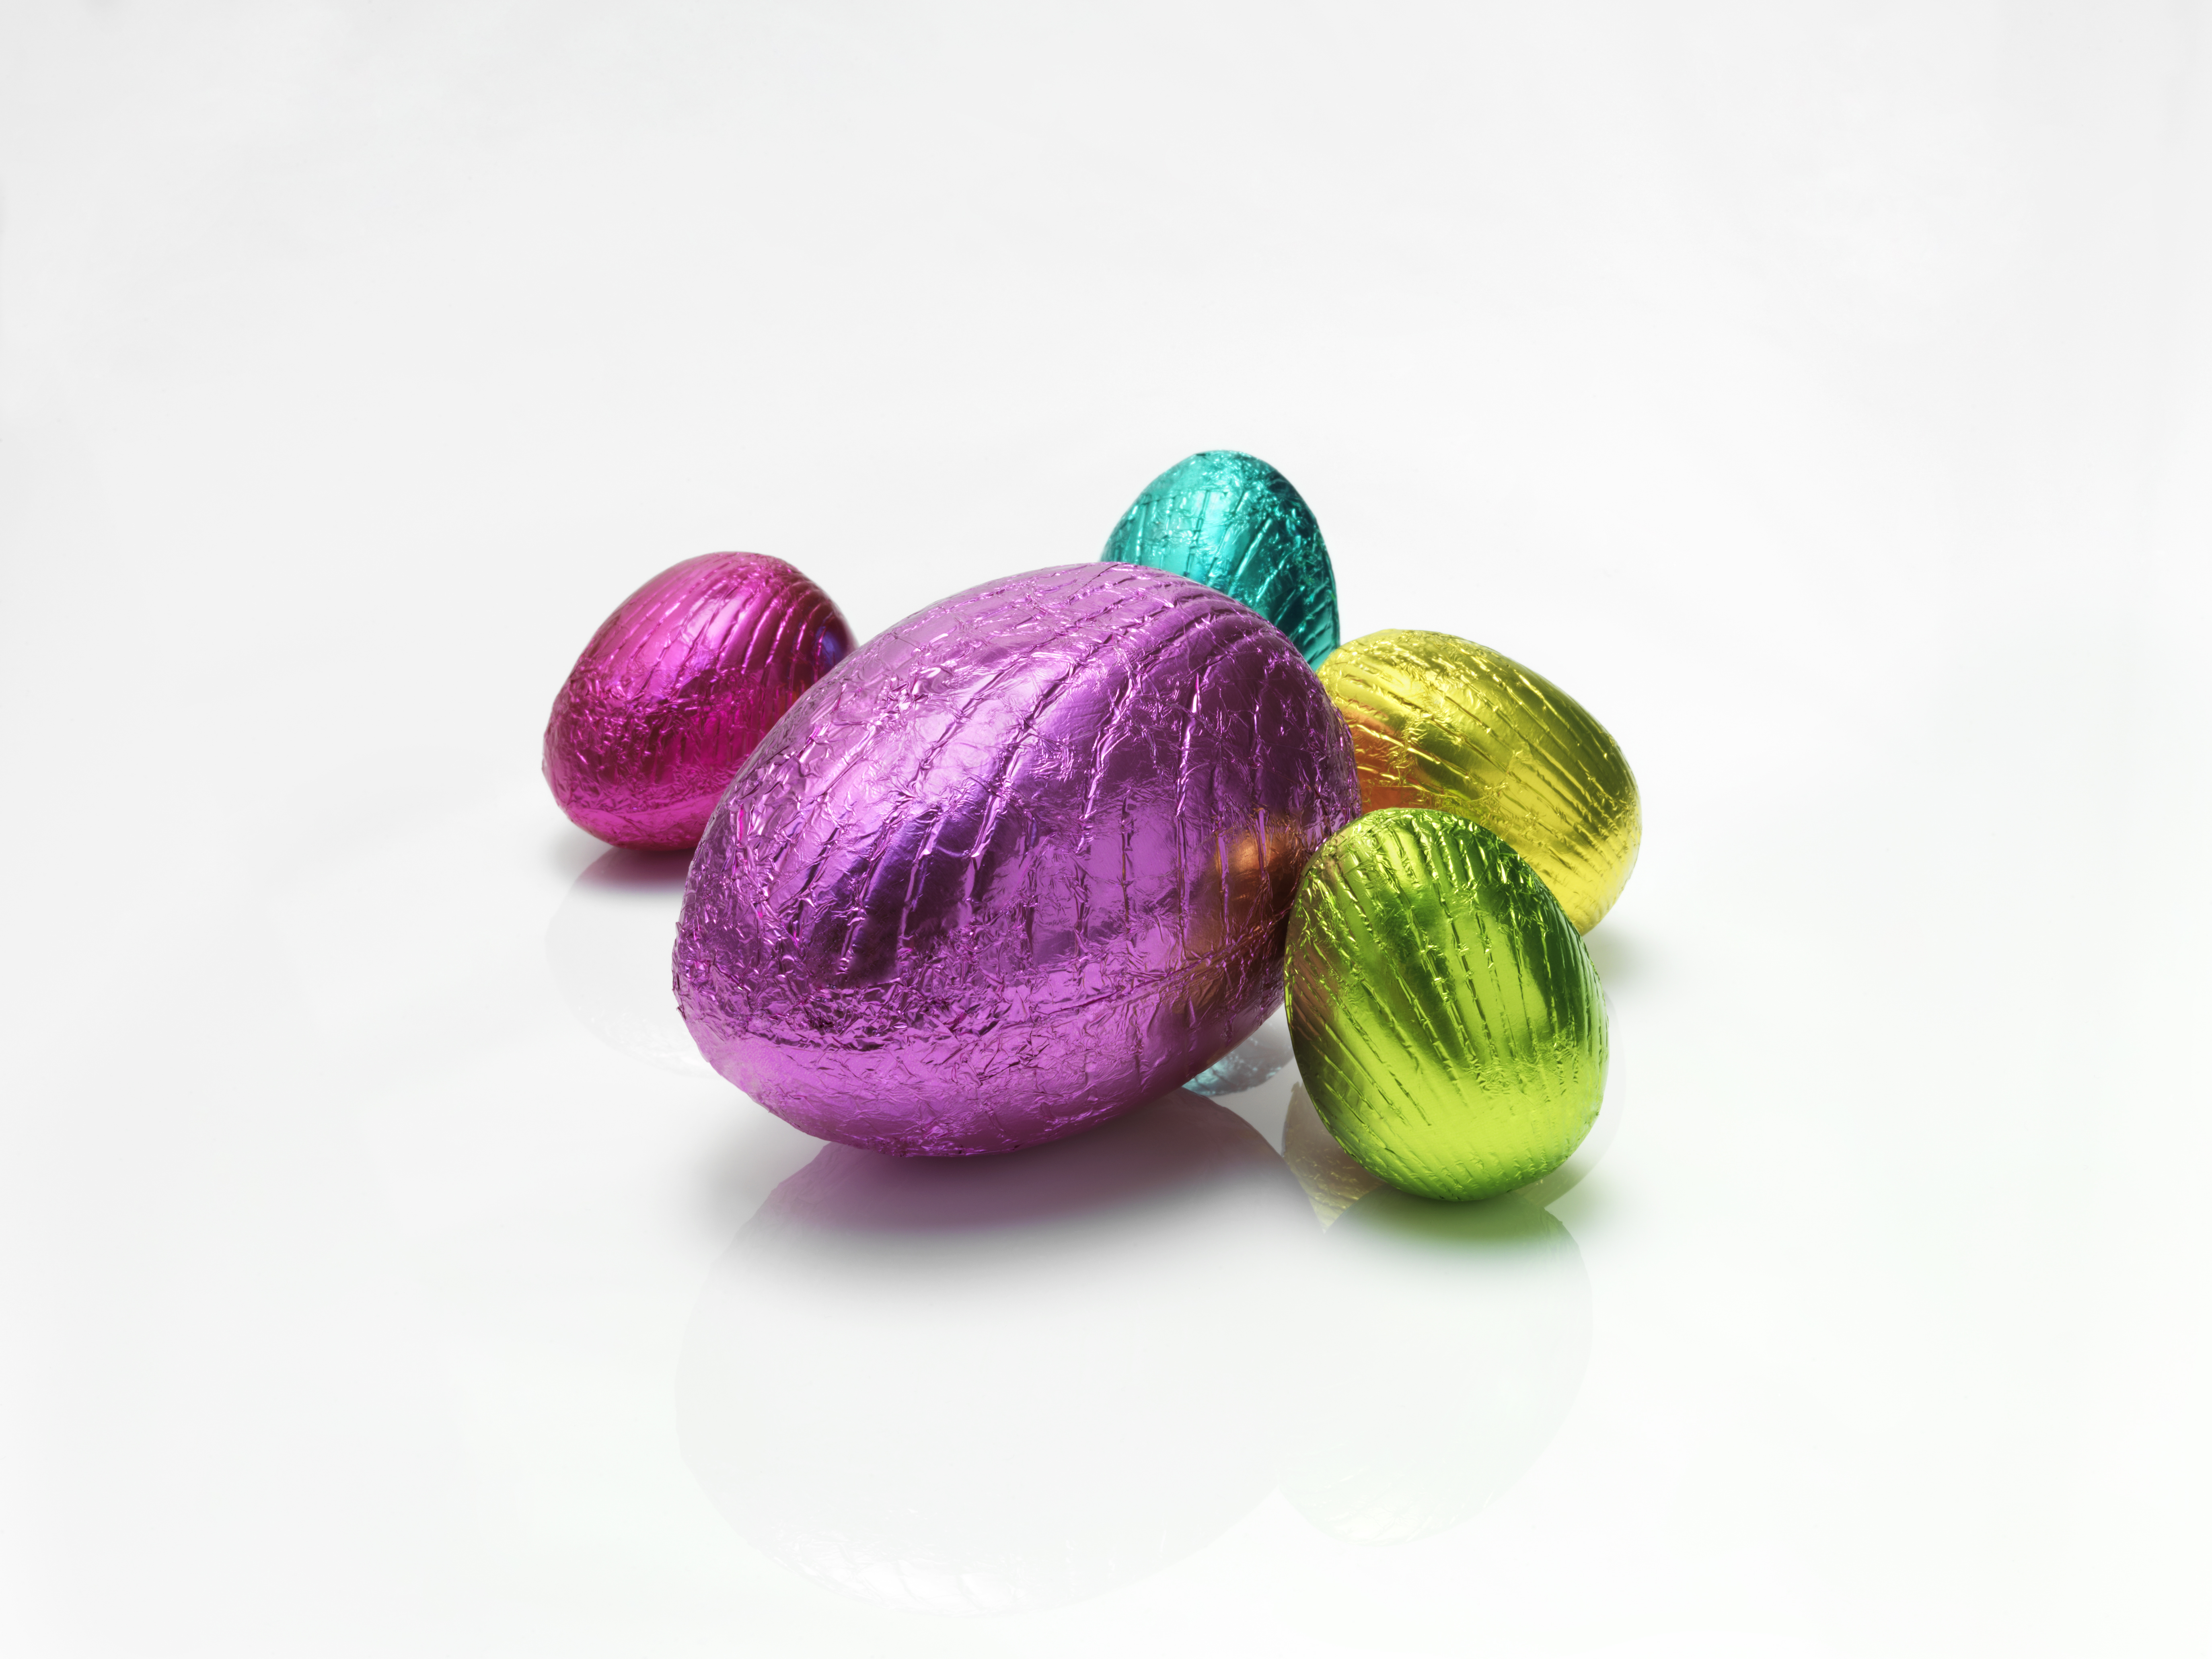 Chocolate Easter egg coma – always pace yourselves